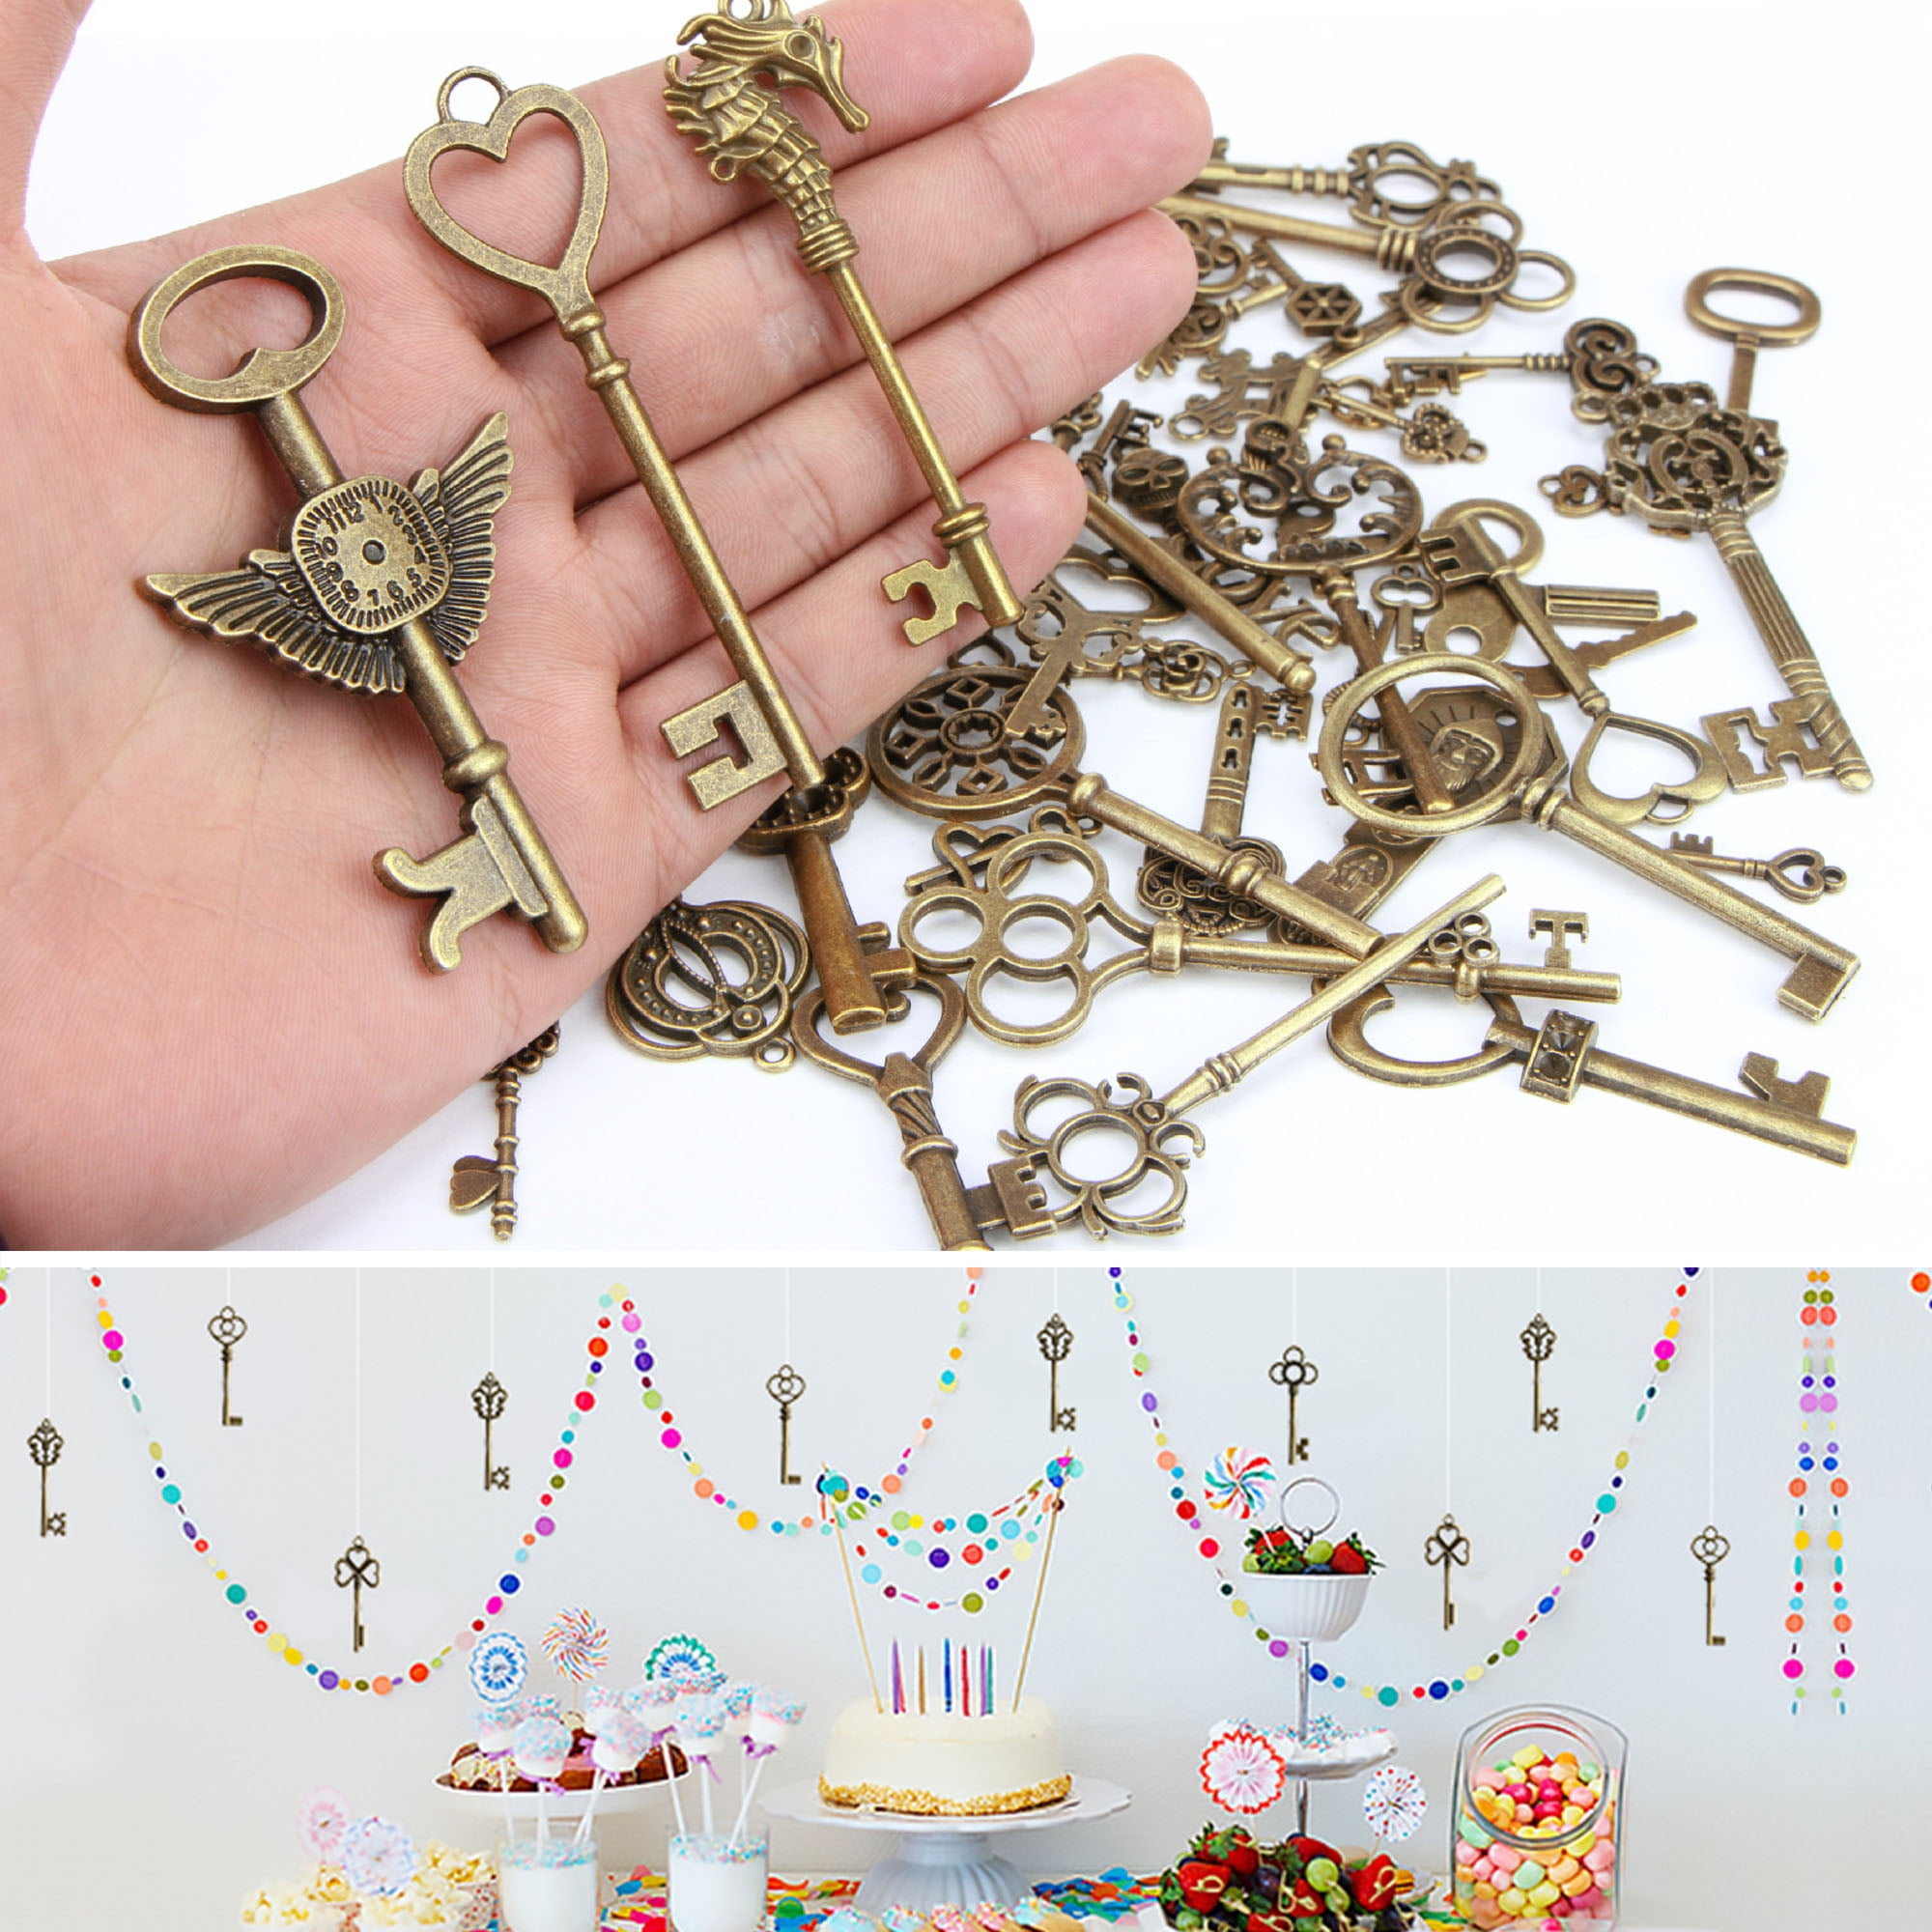 JIALEEY Vintage Skeleton Key Charms, 23 Type of 46PCS Antique Bronze Key  Charms for Necklace Pendant DIY Jewelry Making Supplies Wedding Favors